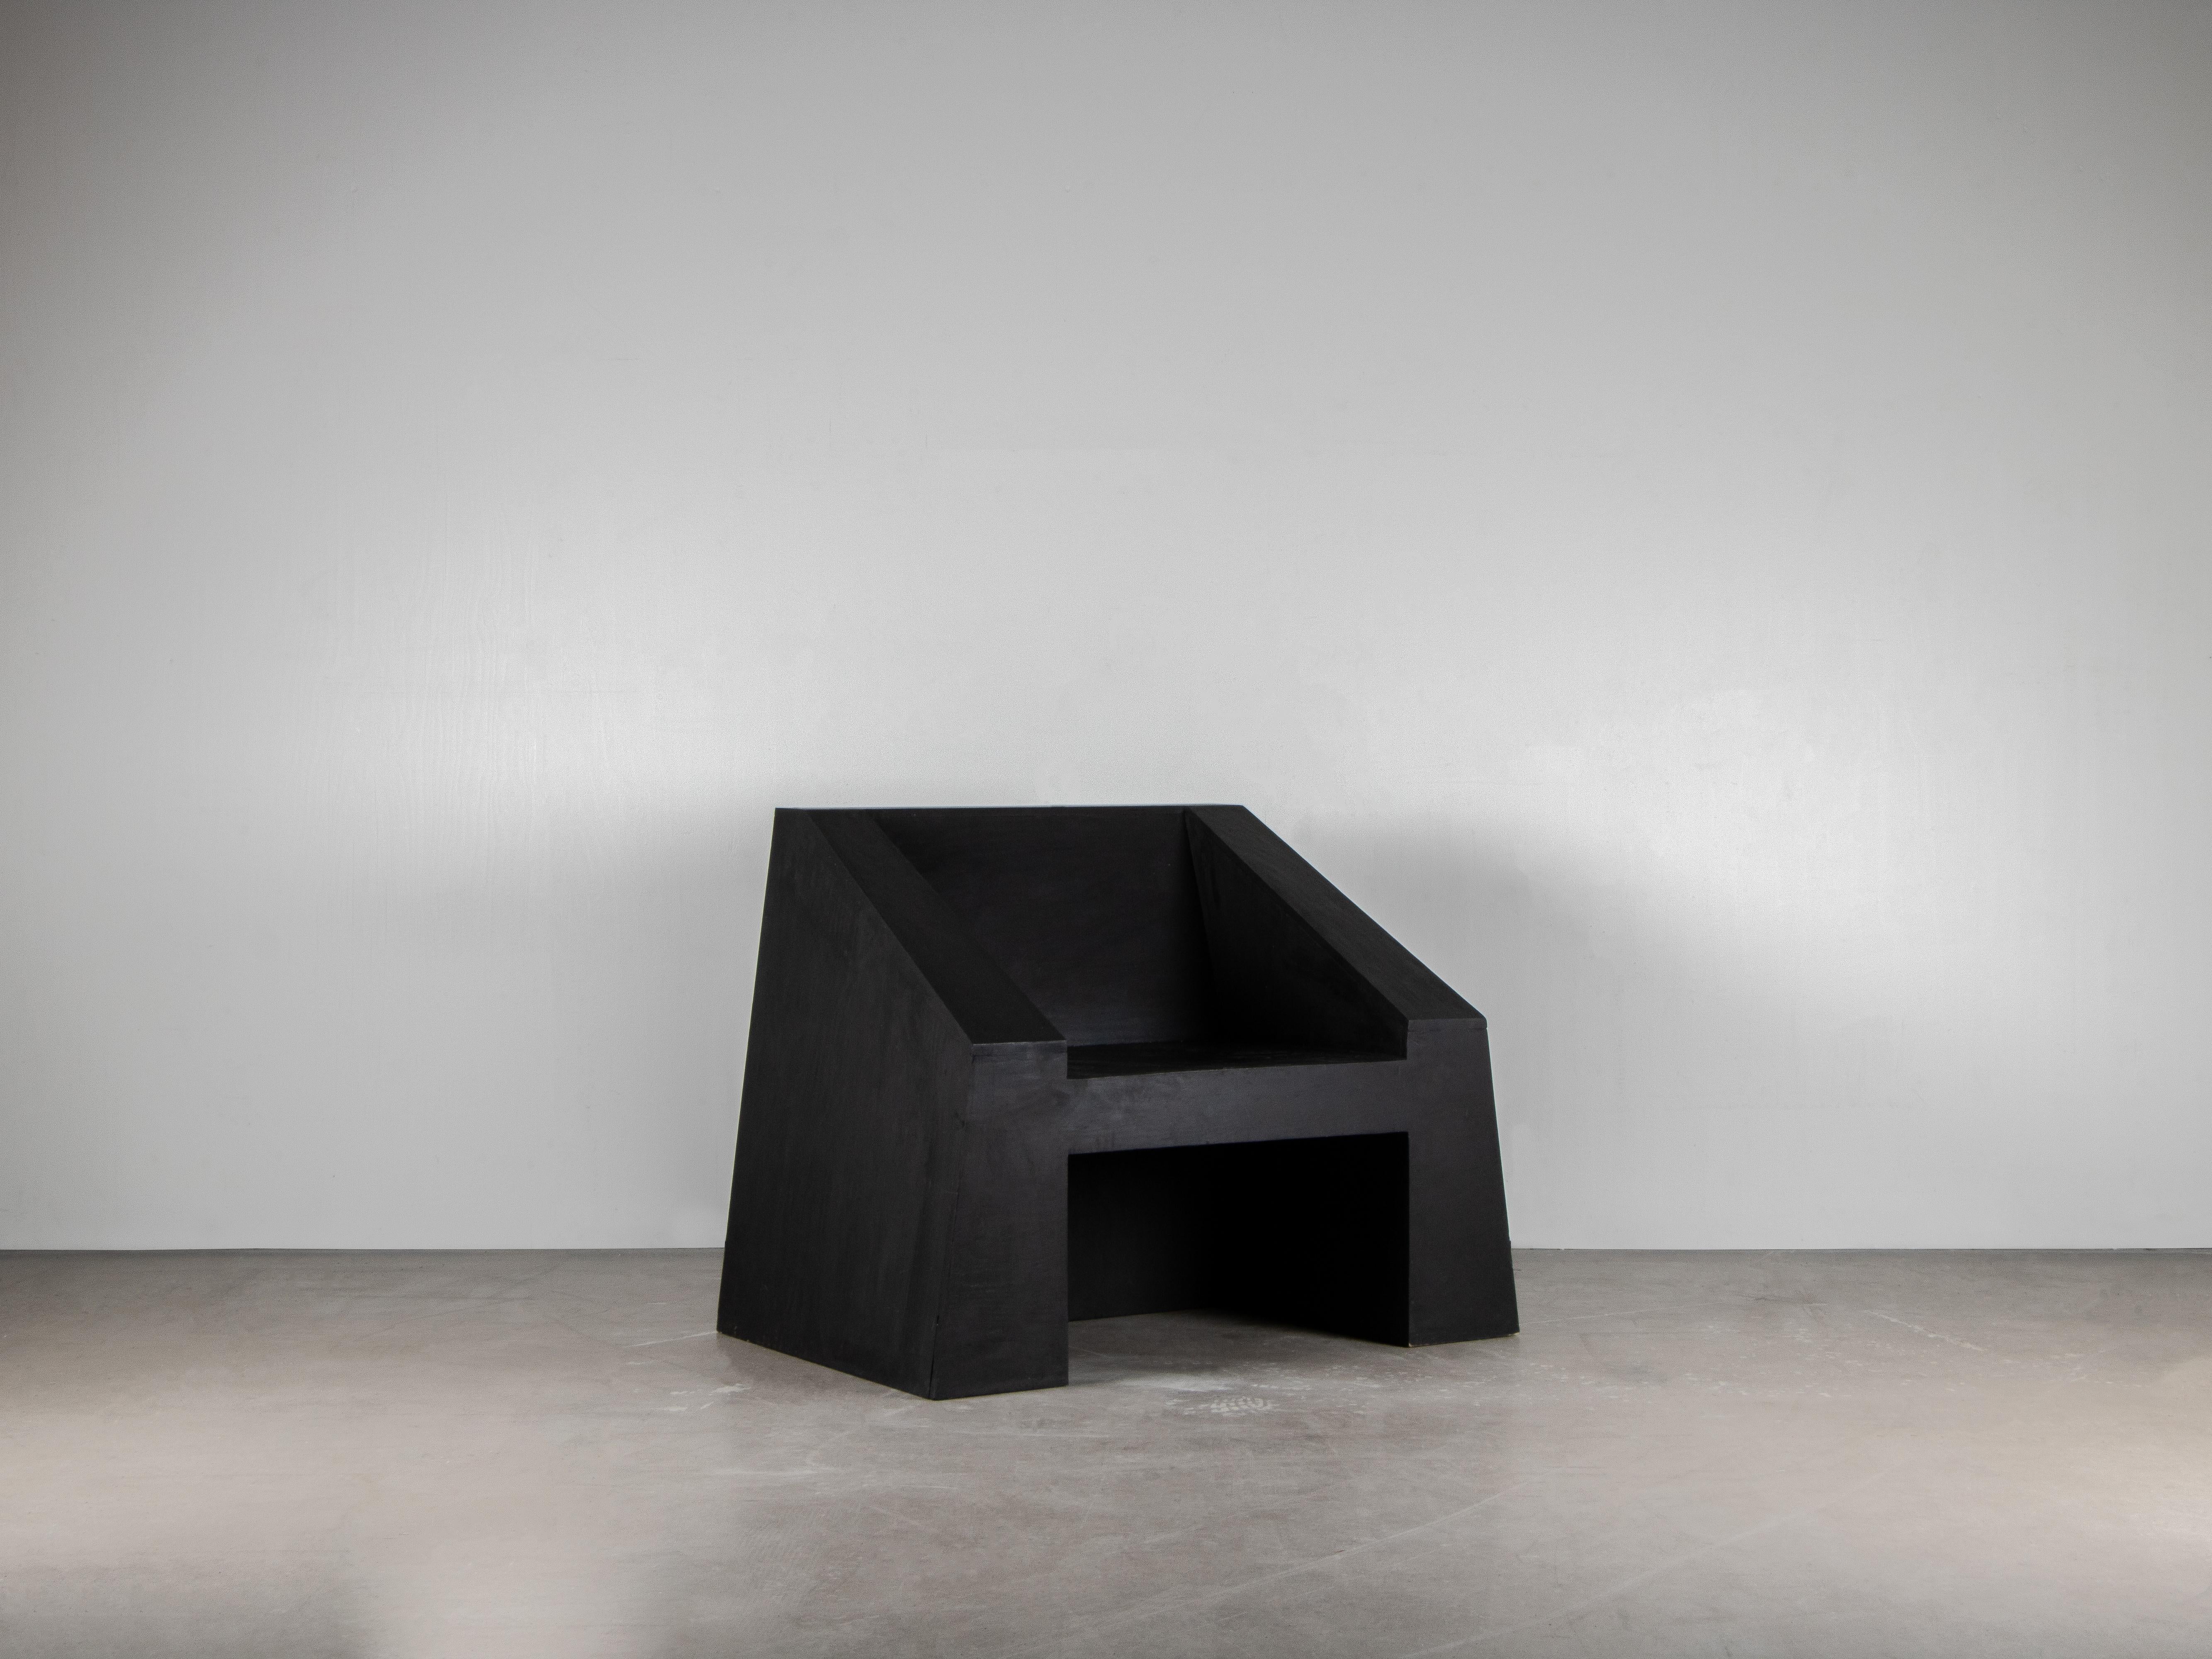 Contemporary black armchair in hand-waxed plywood - Kub chair by Lucas Morten

2021
Limited edition of 18 + 1 AP
Dimensions (cm): W 95 H 75,5 D 65
Material: hand-waxed plywood

With elements inspired by one of the earliest monumental